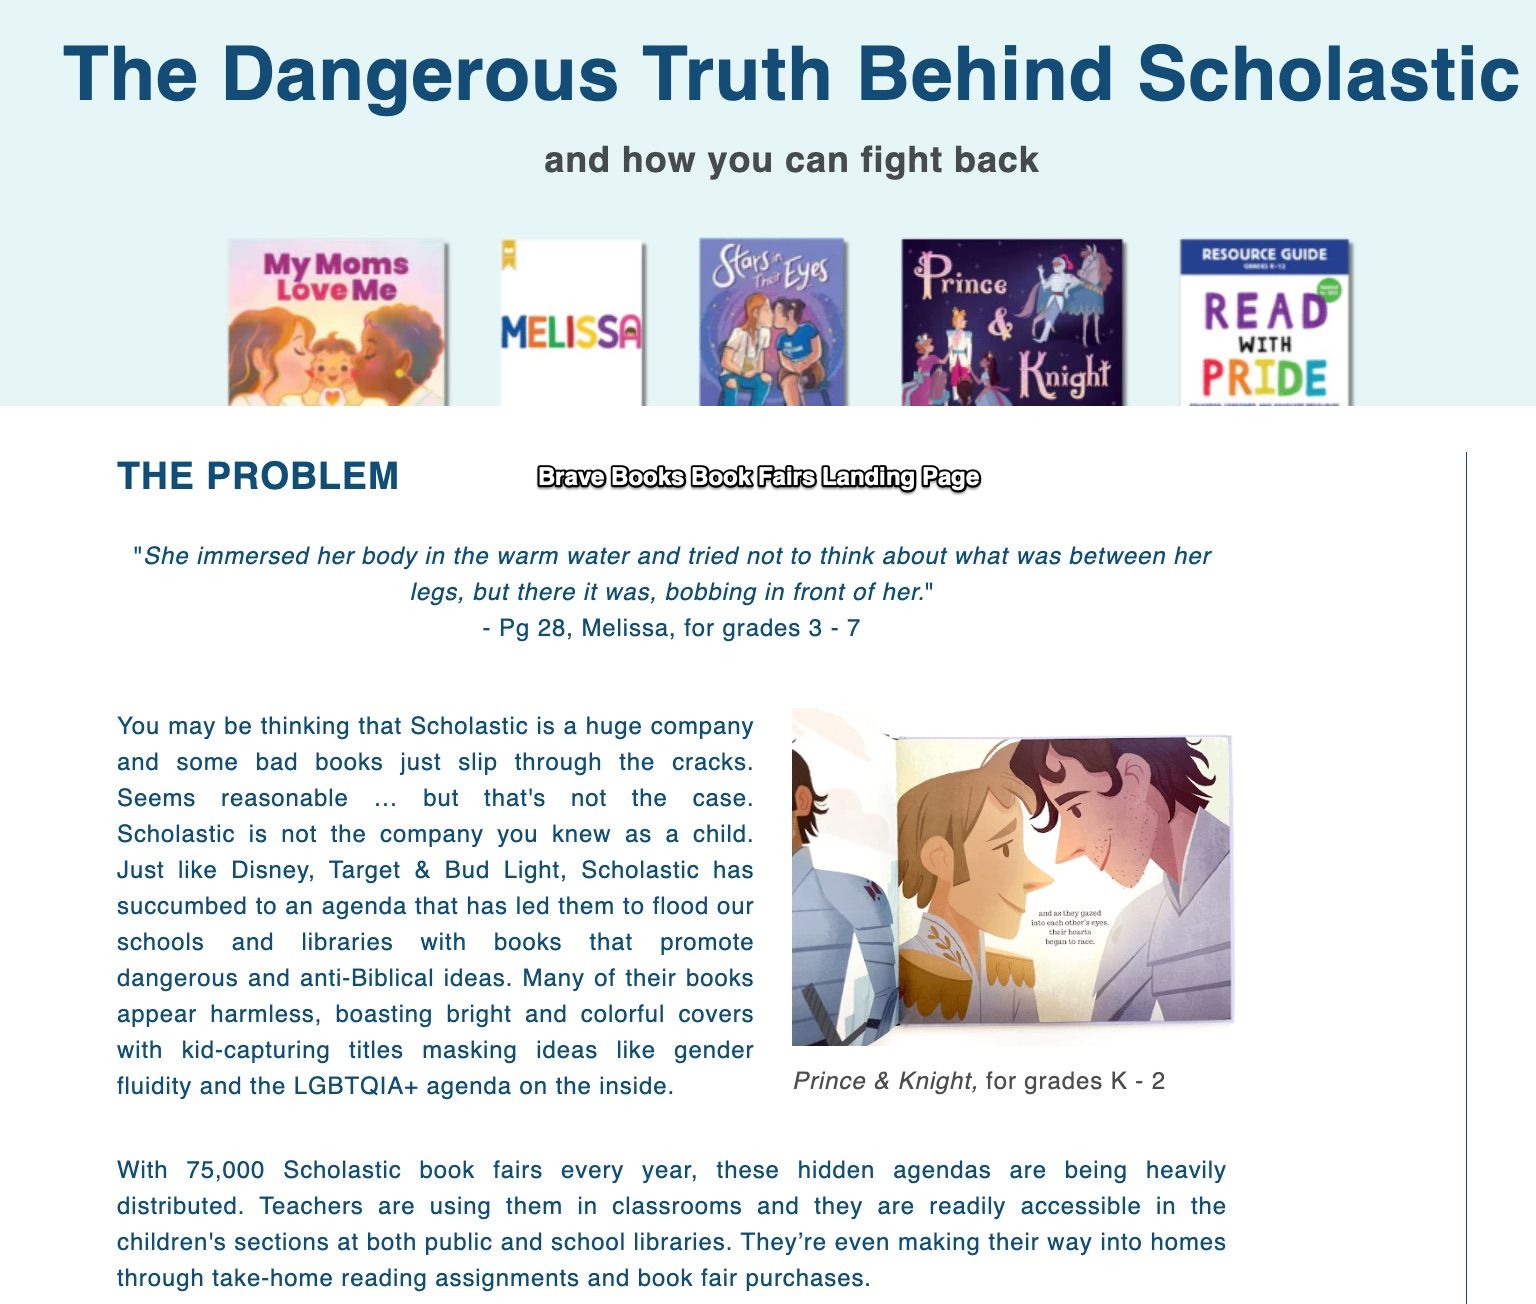 Screen shot of Brave Books's book fair landing page talking at length about the dangers of scholastic. 